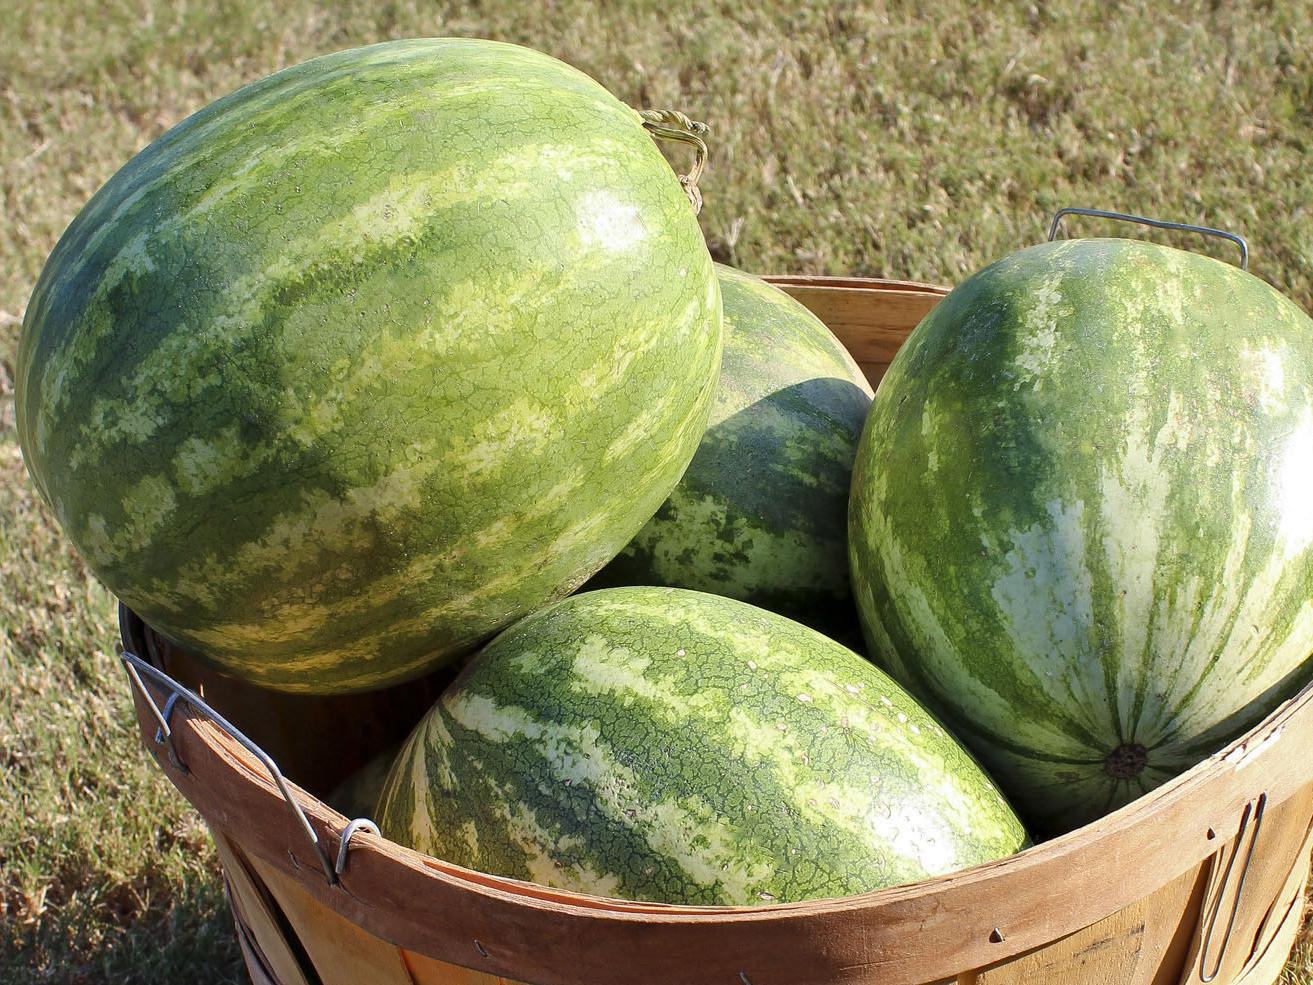 Mississippi's watermelon growers have harvested more than 40 percent of their crop already, a 22 percent increase from the same period last year. The crop's good quality and popularity has consumers buying up the harvest quickly at farmers' markets and farm stands across the state. (Photo by MSU Ag Communications/Keri Collins Lewis)